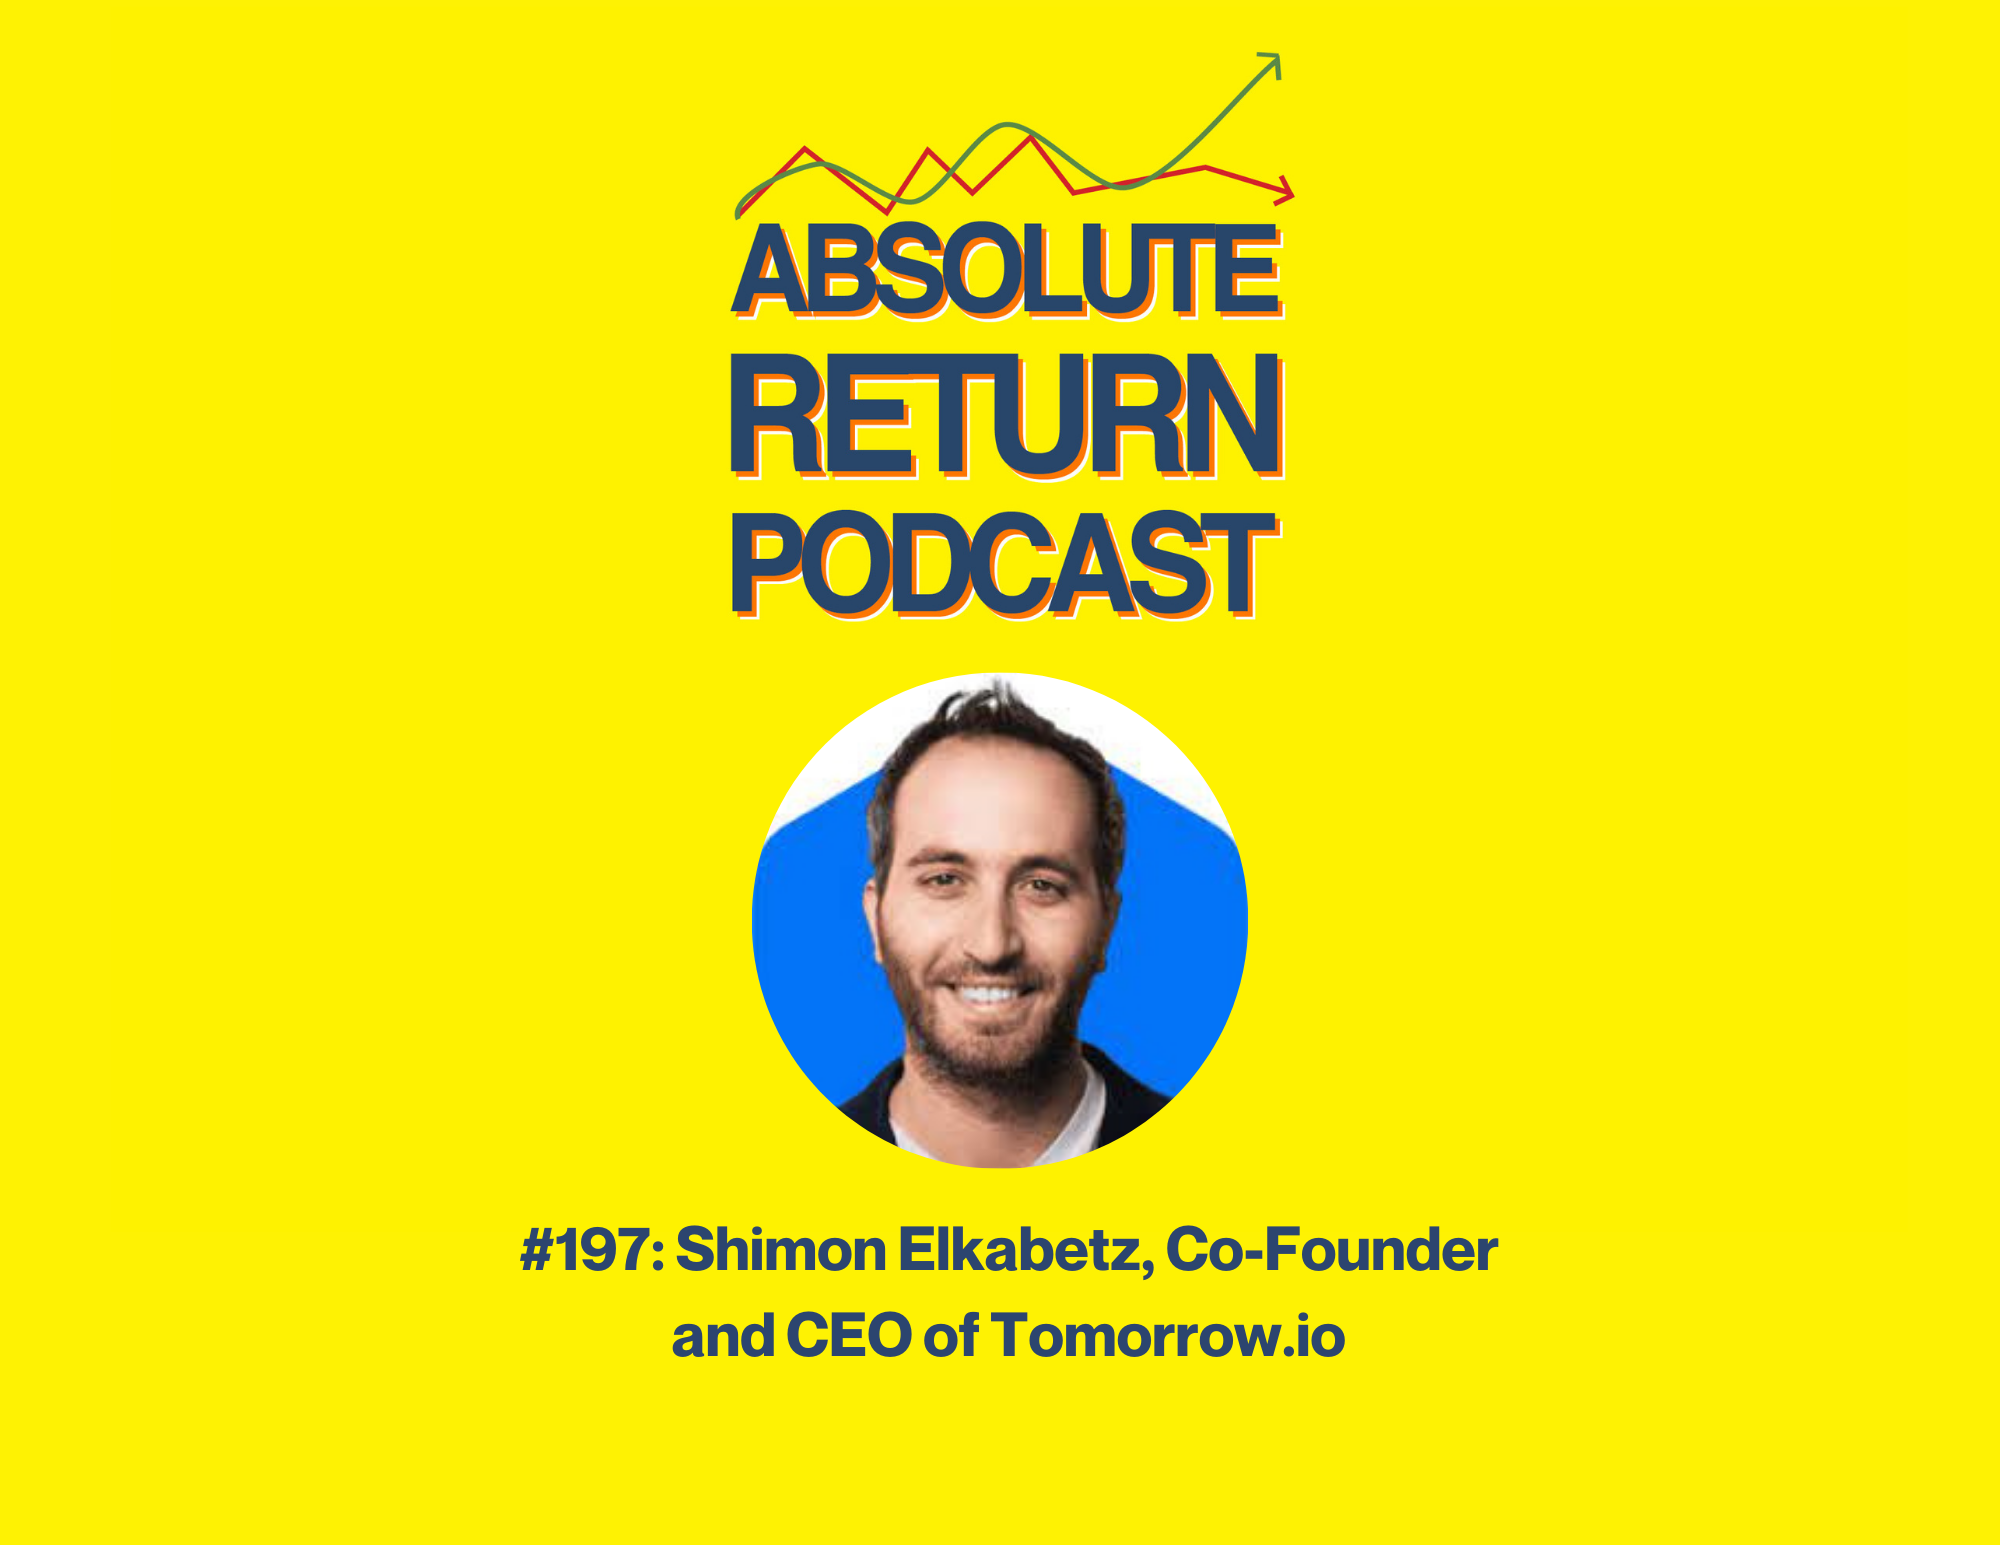 Absolute Return Podcast #197: Leadership Chat: Shimon Elkabetz, Co-Founder and CEO of Tomorrow.io